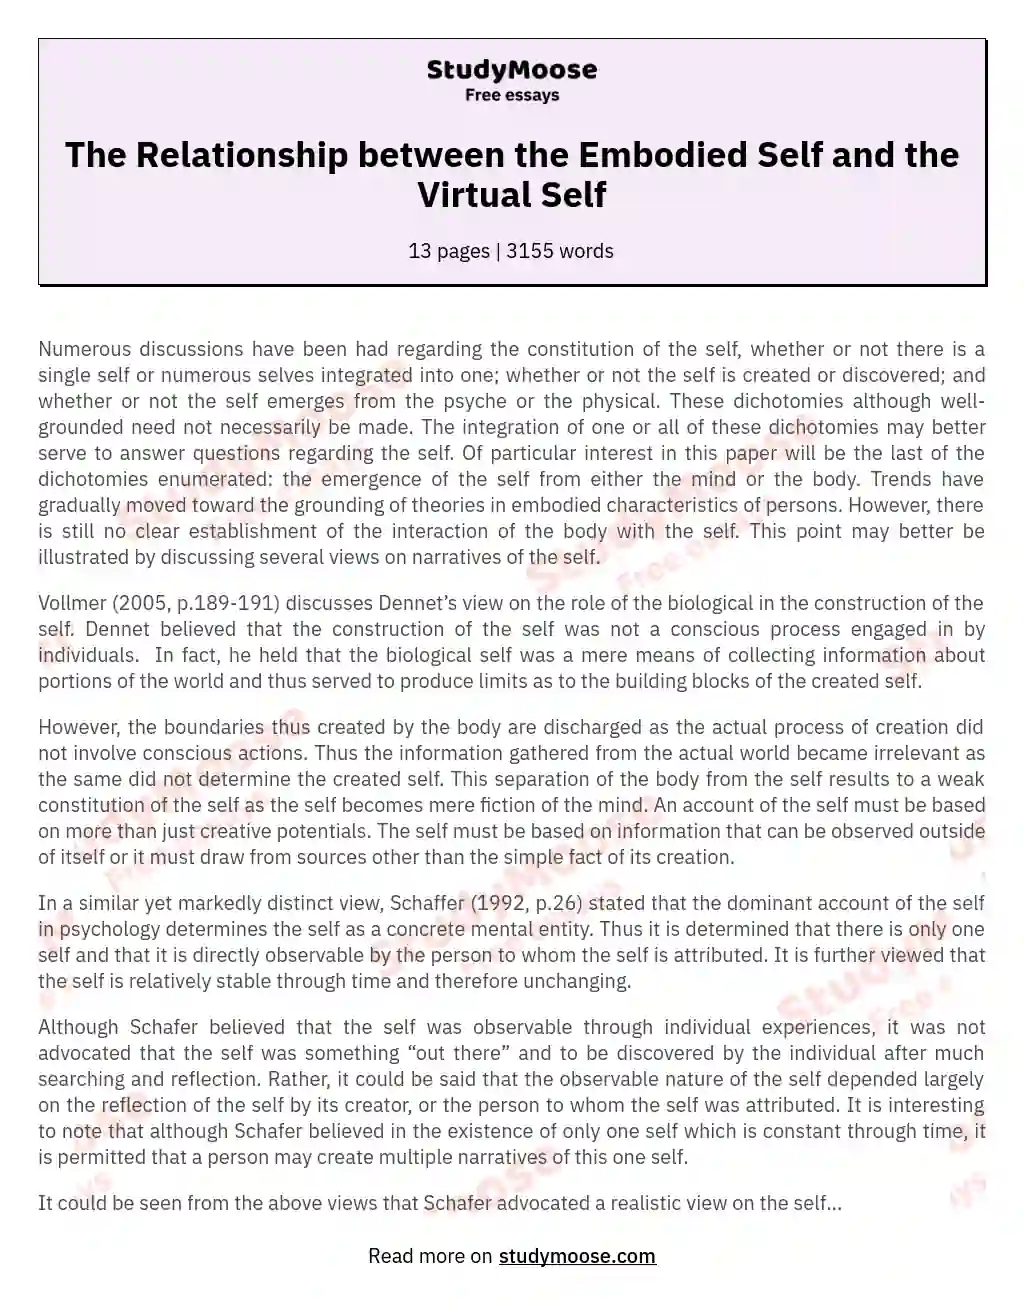 The Relationship between the Embodied Self and the Virtual Self